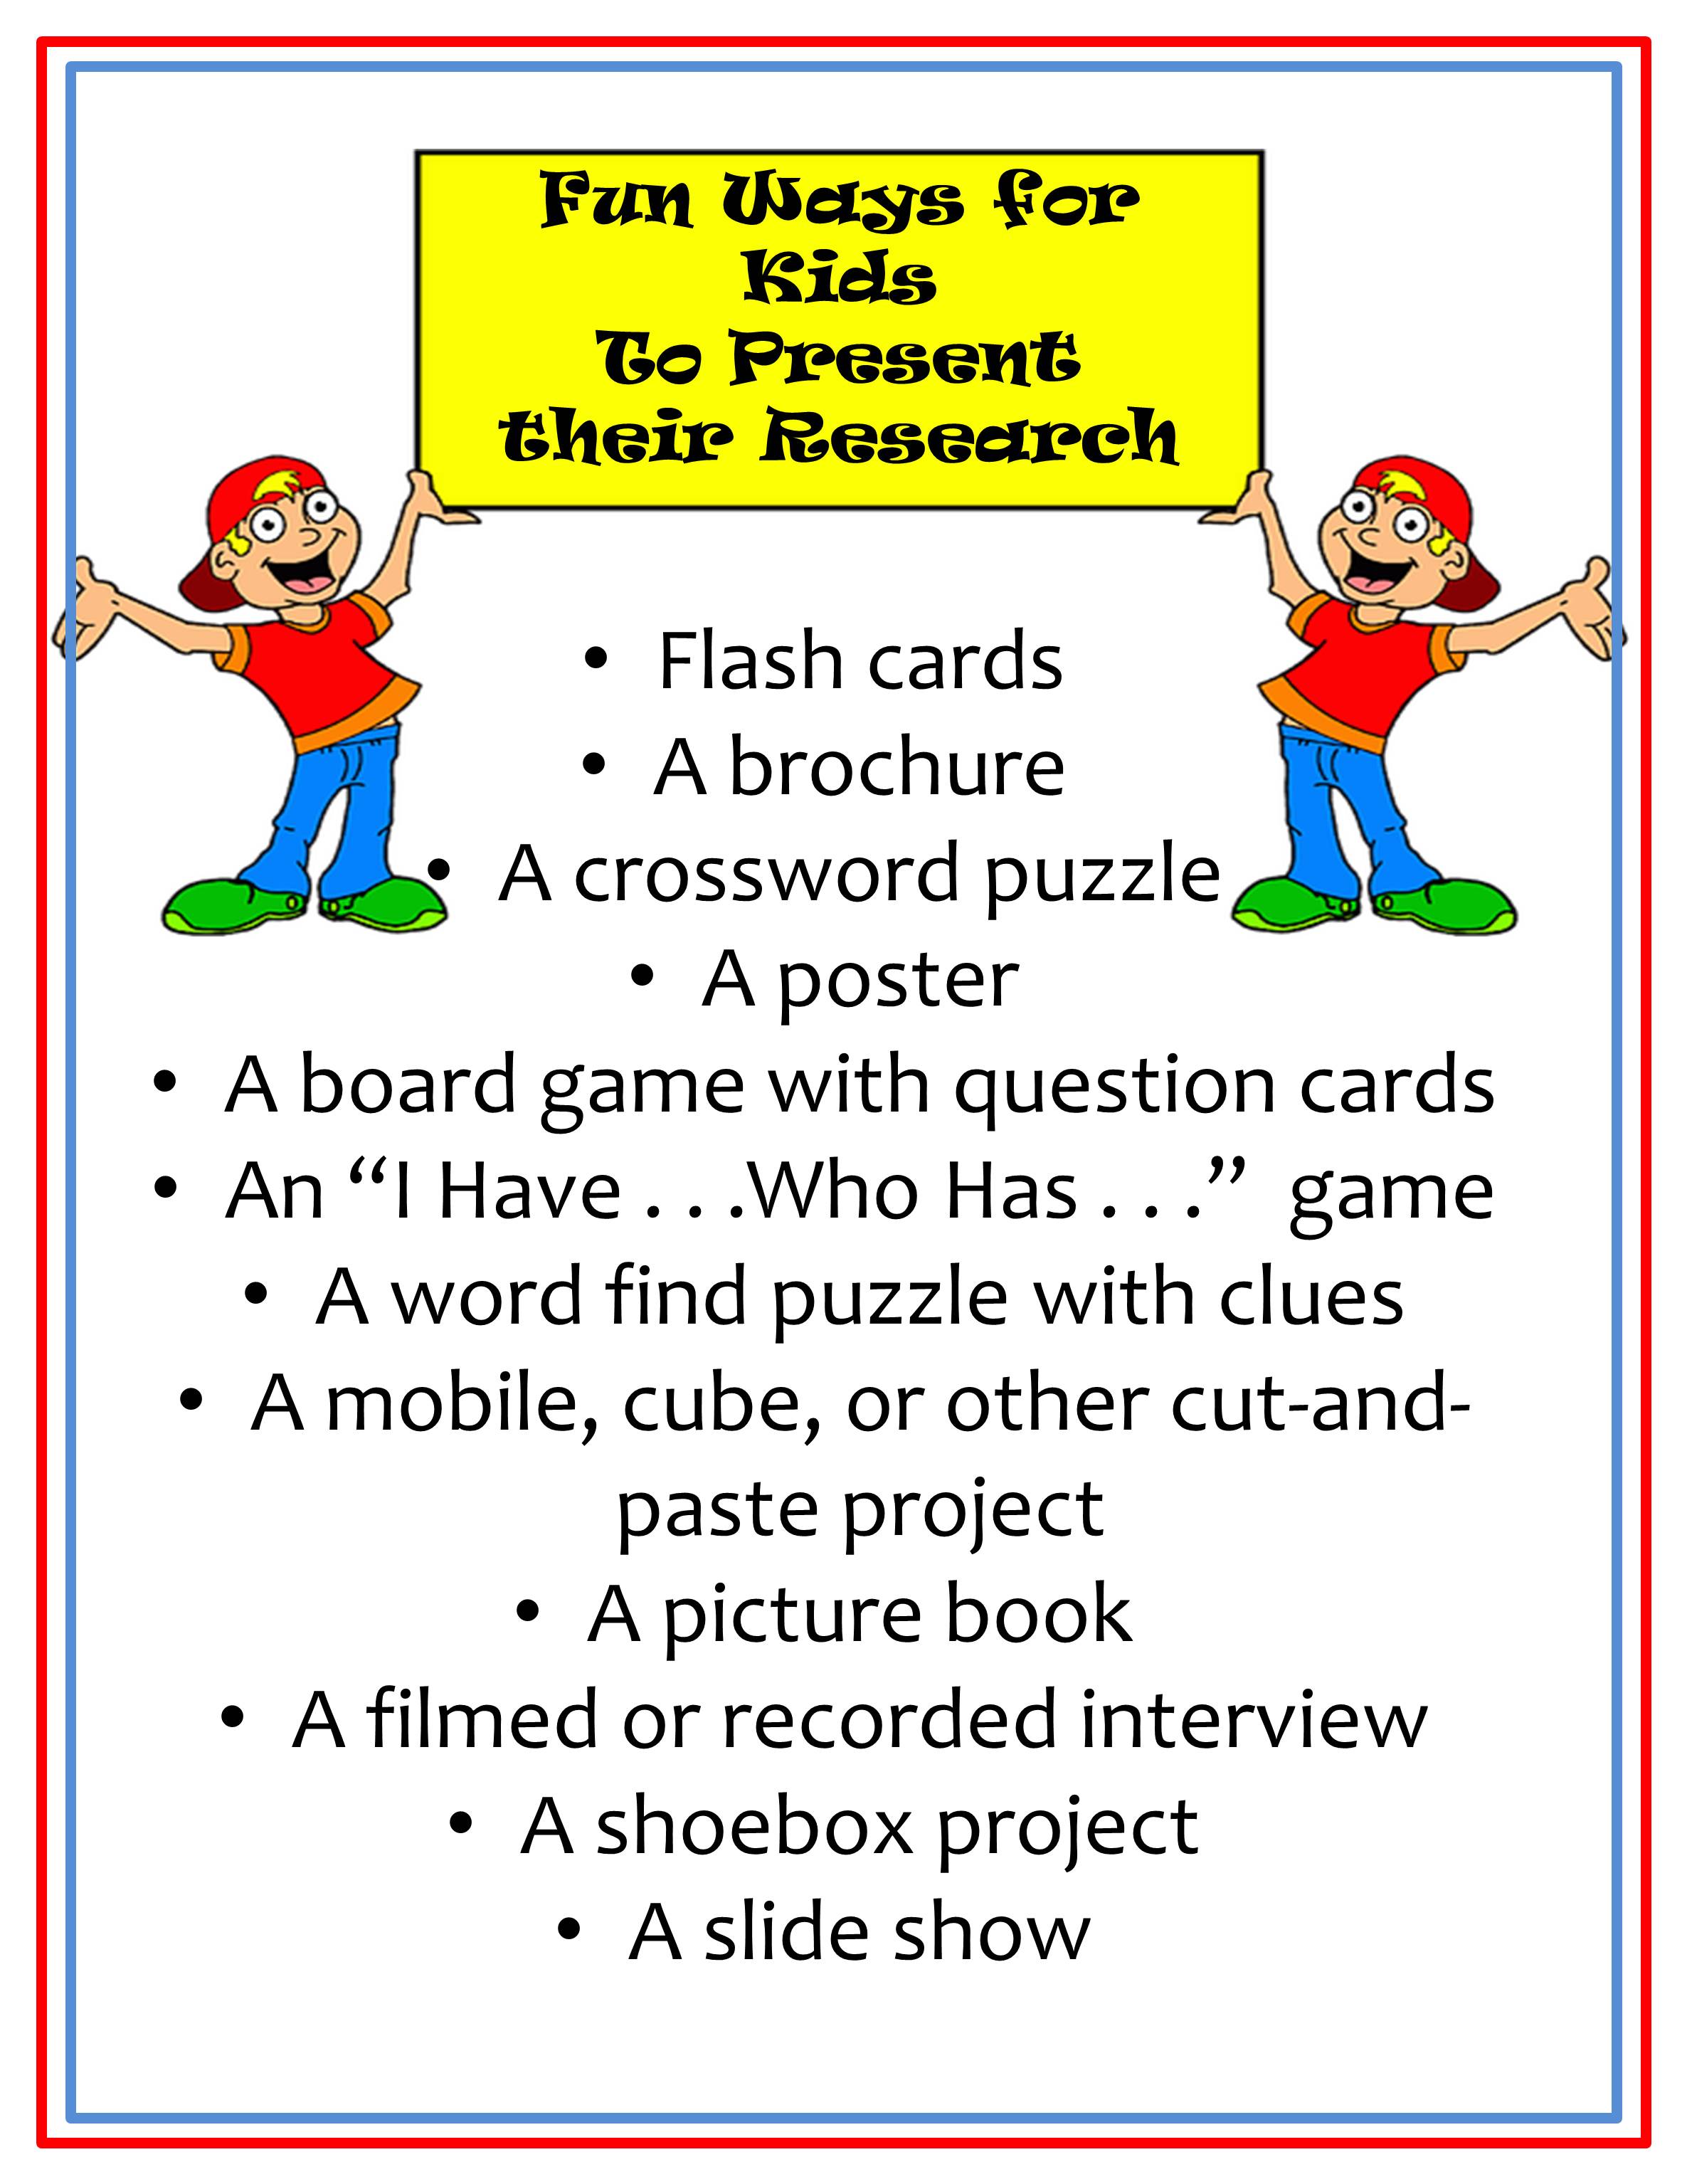 fun ways to present a research project